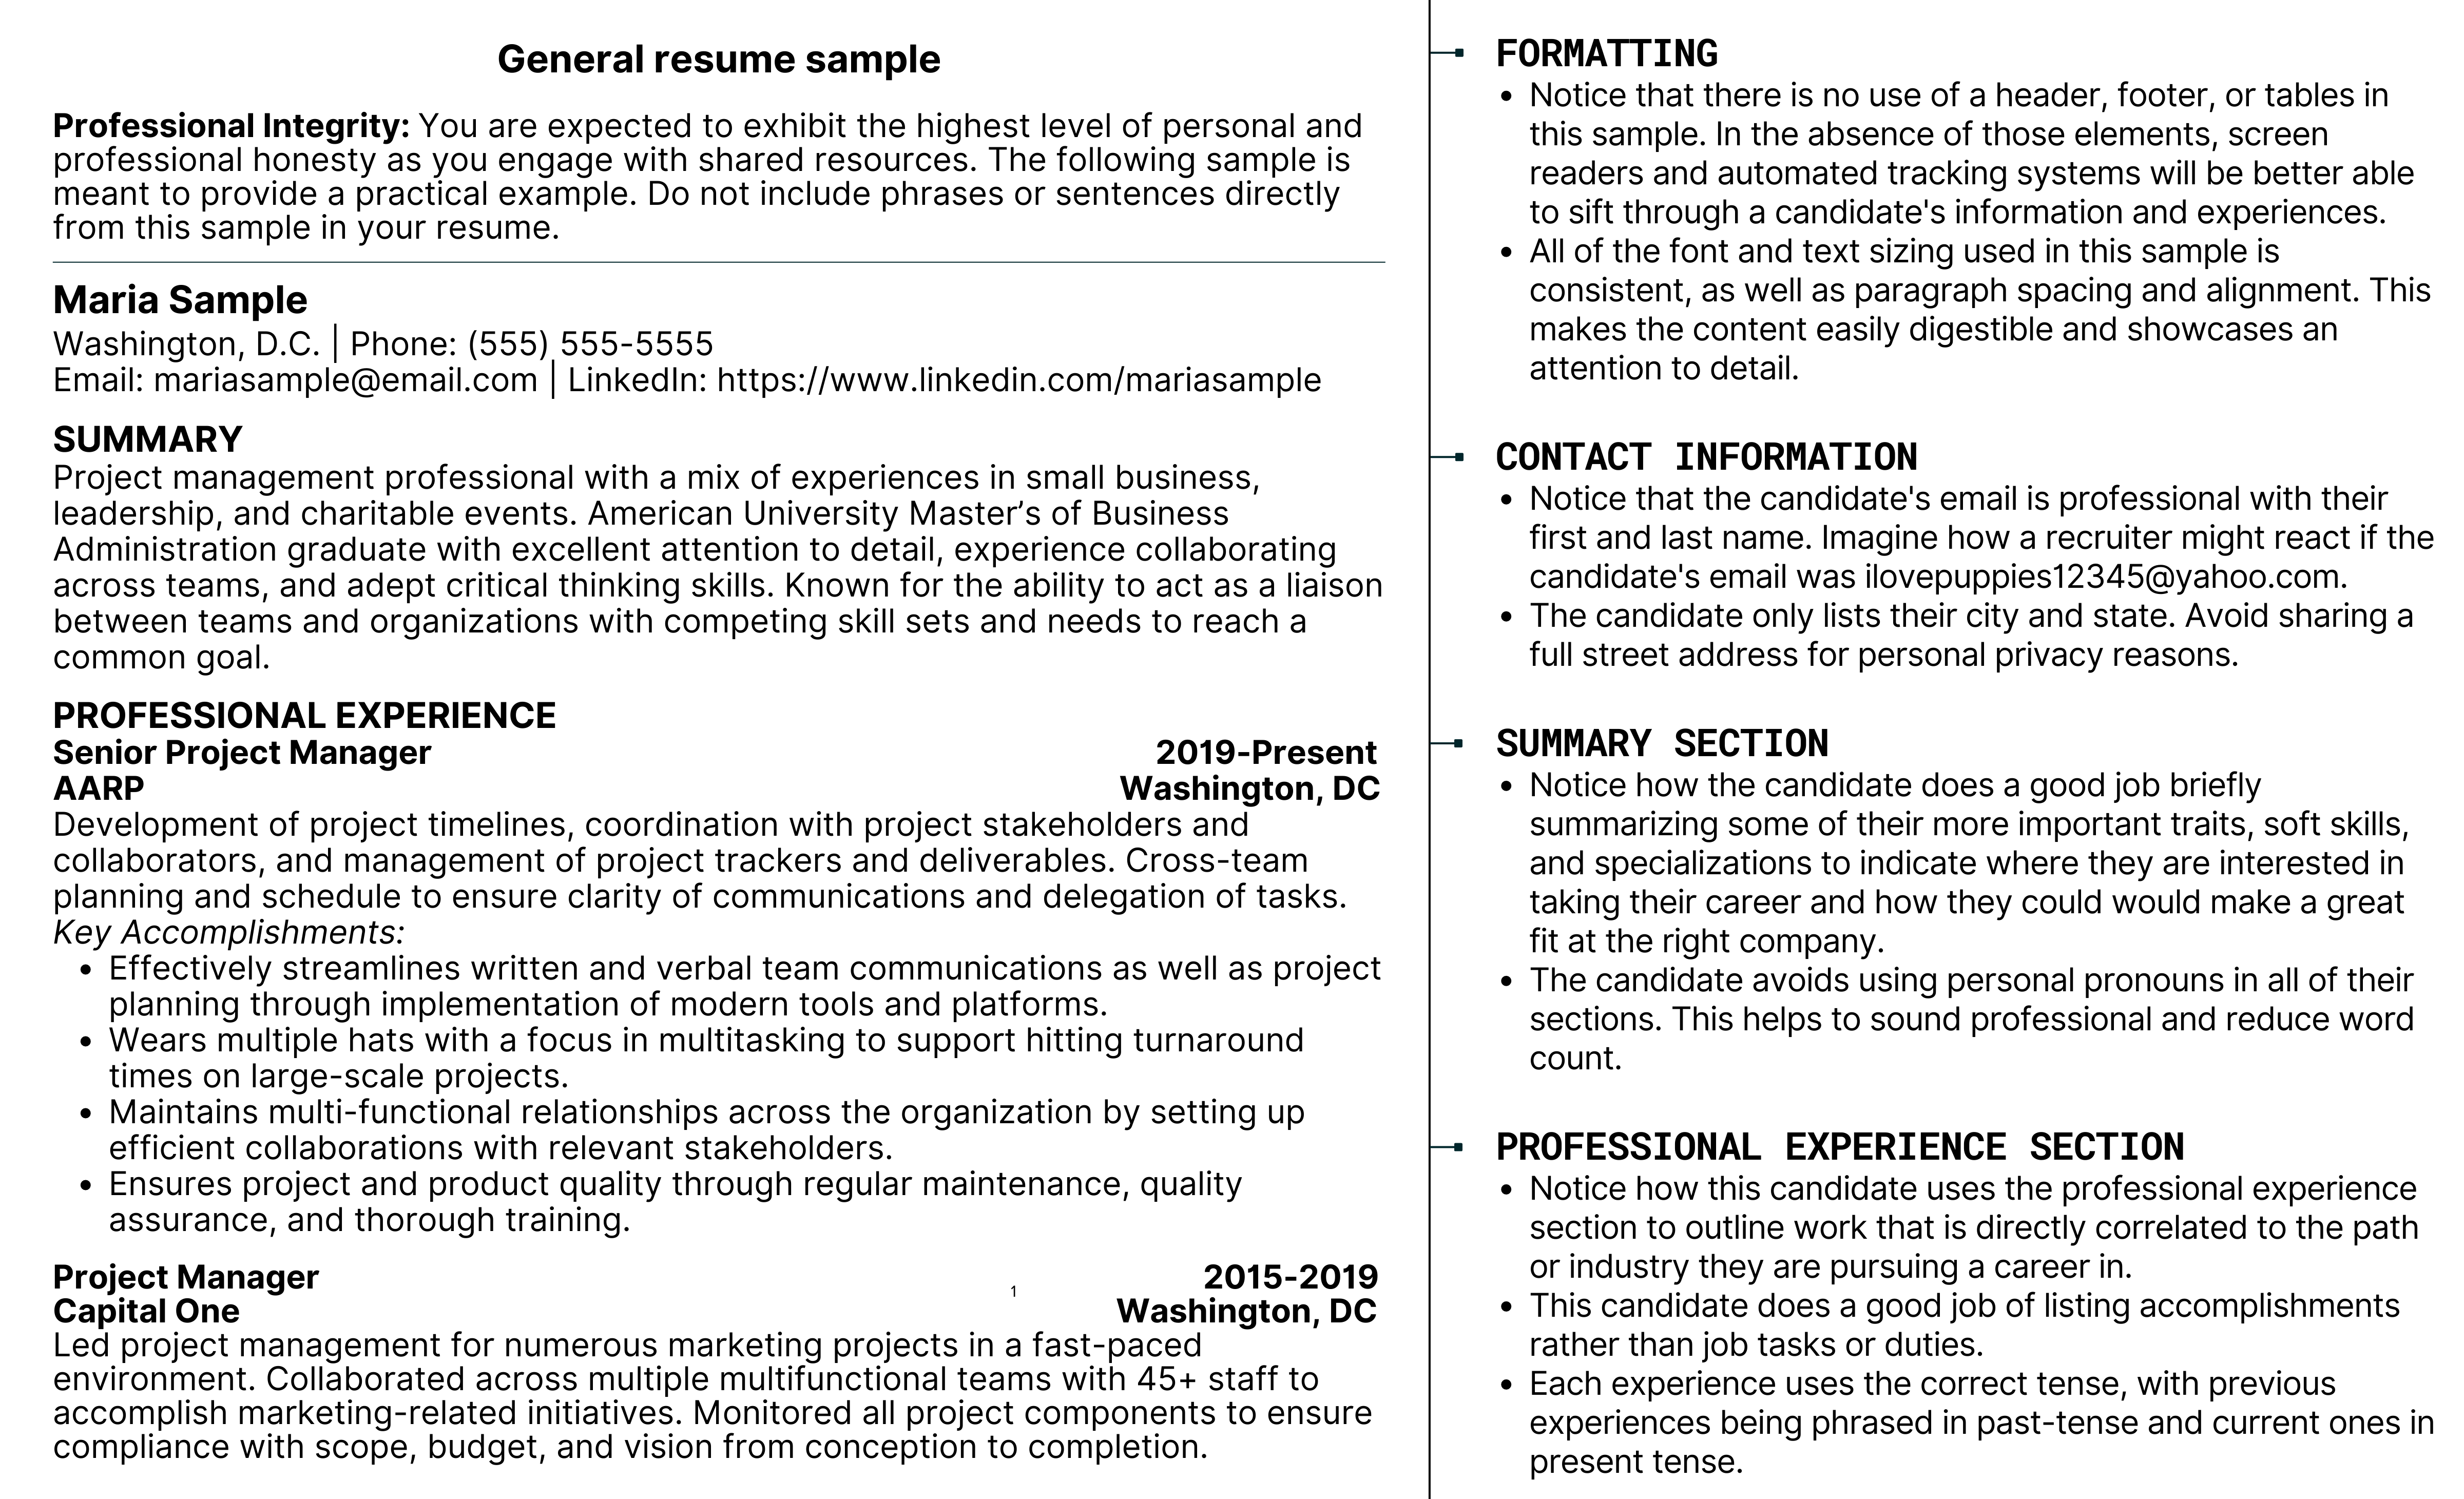 Page one of a sample resume diagram with tips on what the candidate did successfully.